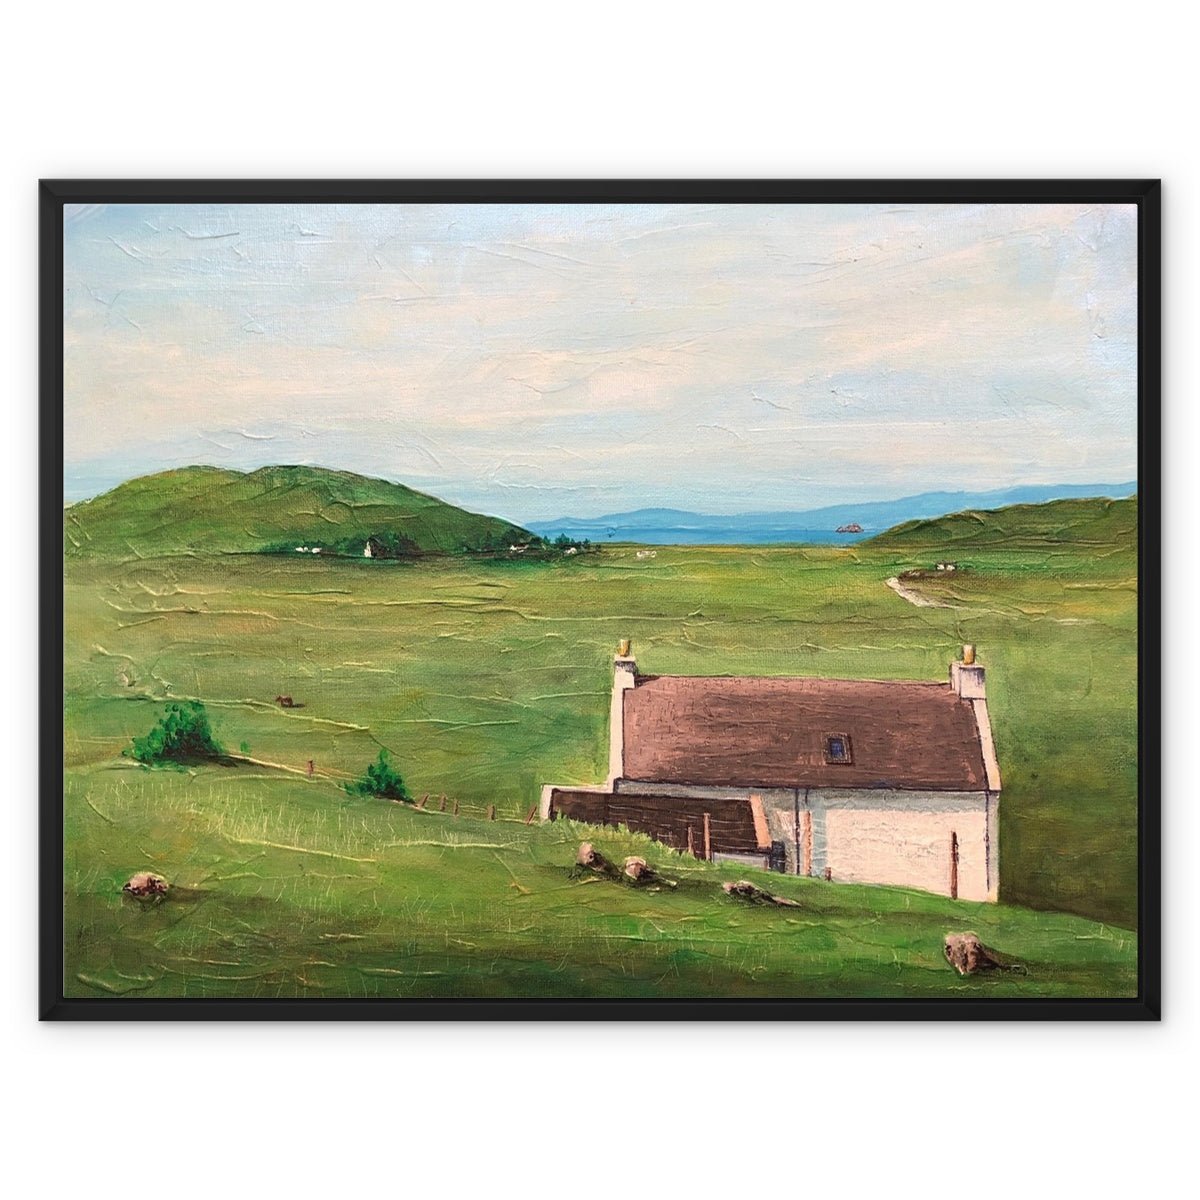 A Skye Cottage Painting | Framed Canvas From Scotland-Floating Framed Canvas Prints-Skye Art Gallery-32"x24"-Black Frame-Paintings, Prints, Homeware, Art Gifts From Scotland By Scottish Artist Kevin Hunter